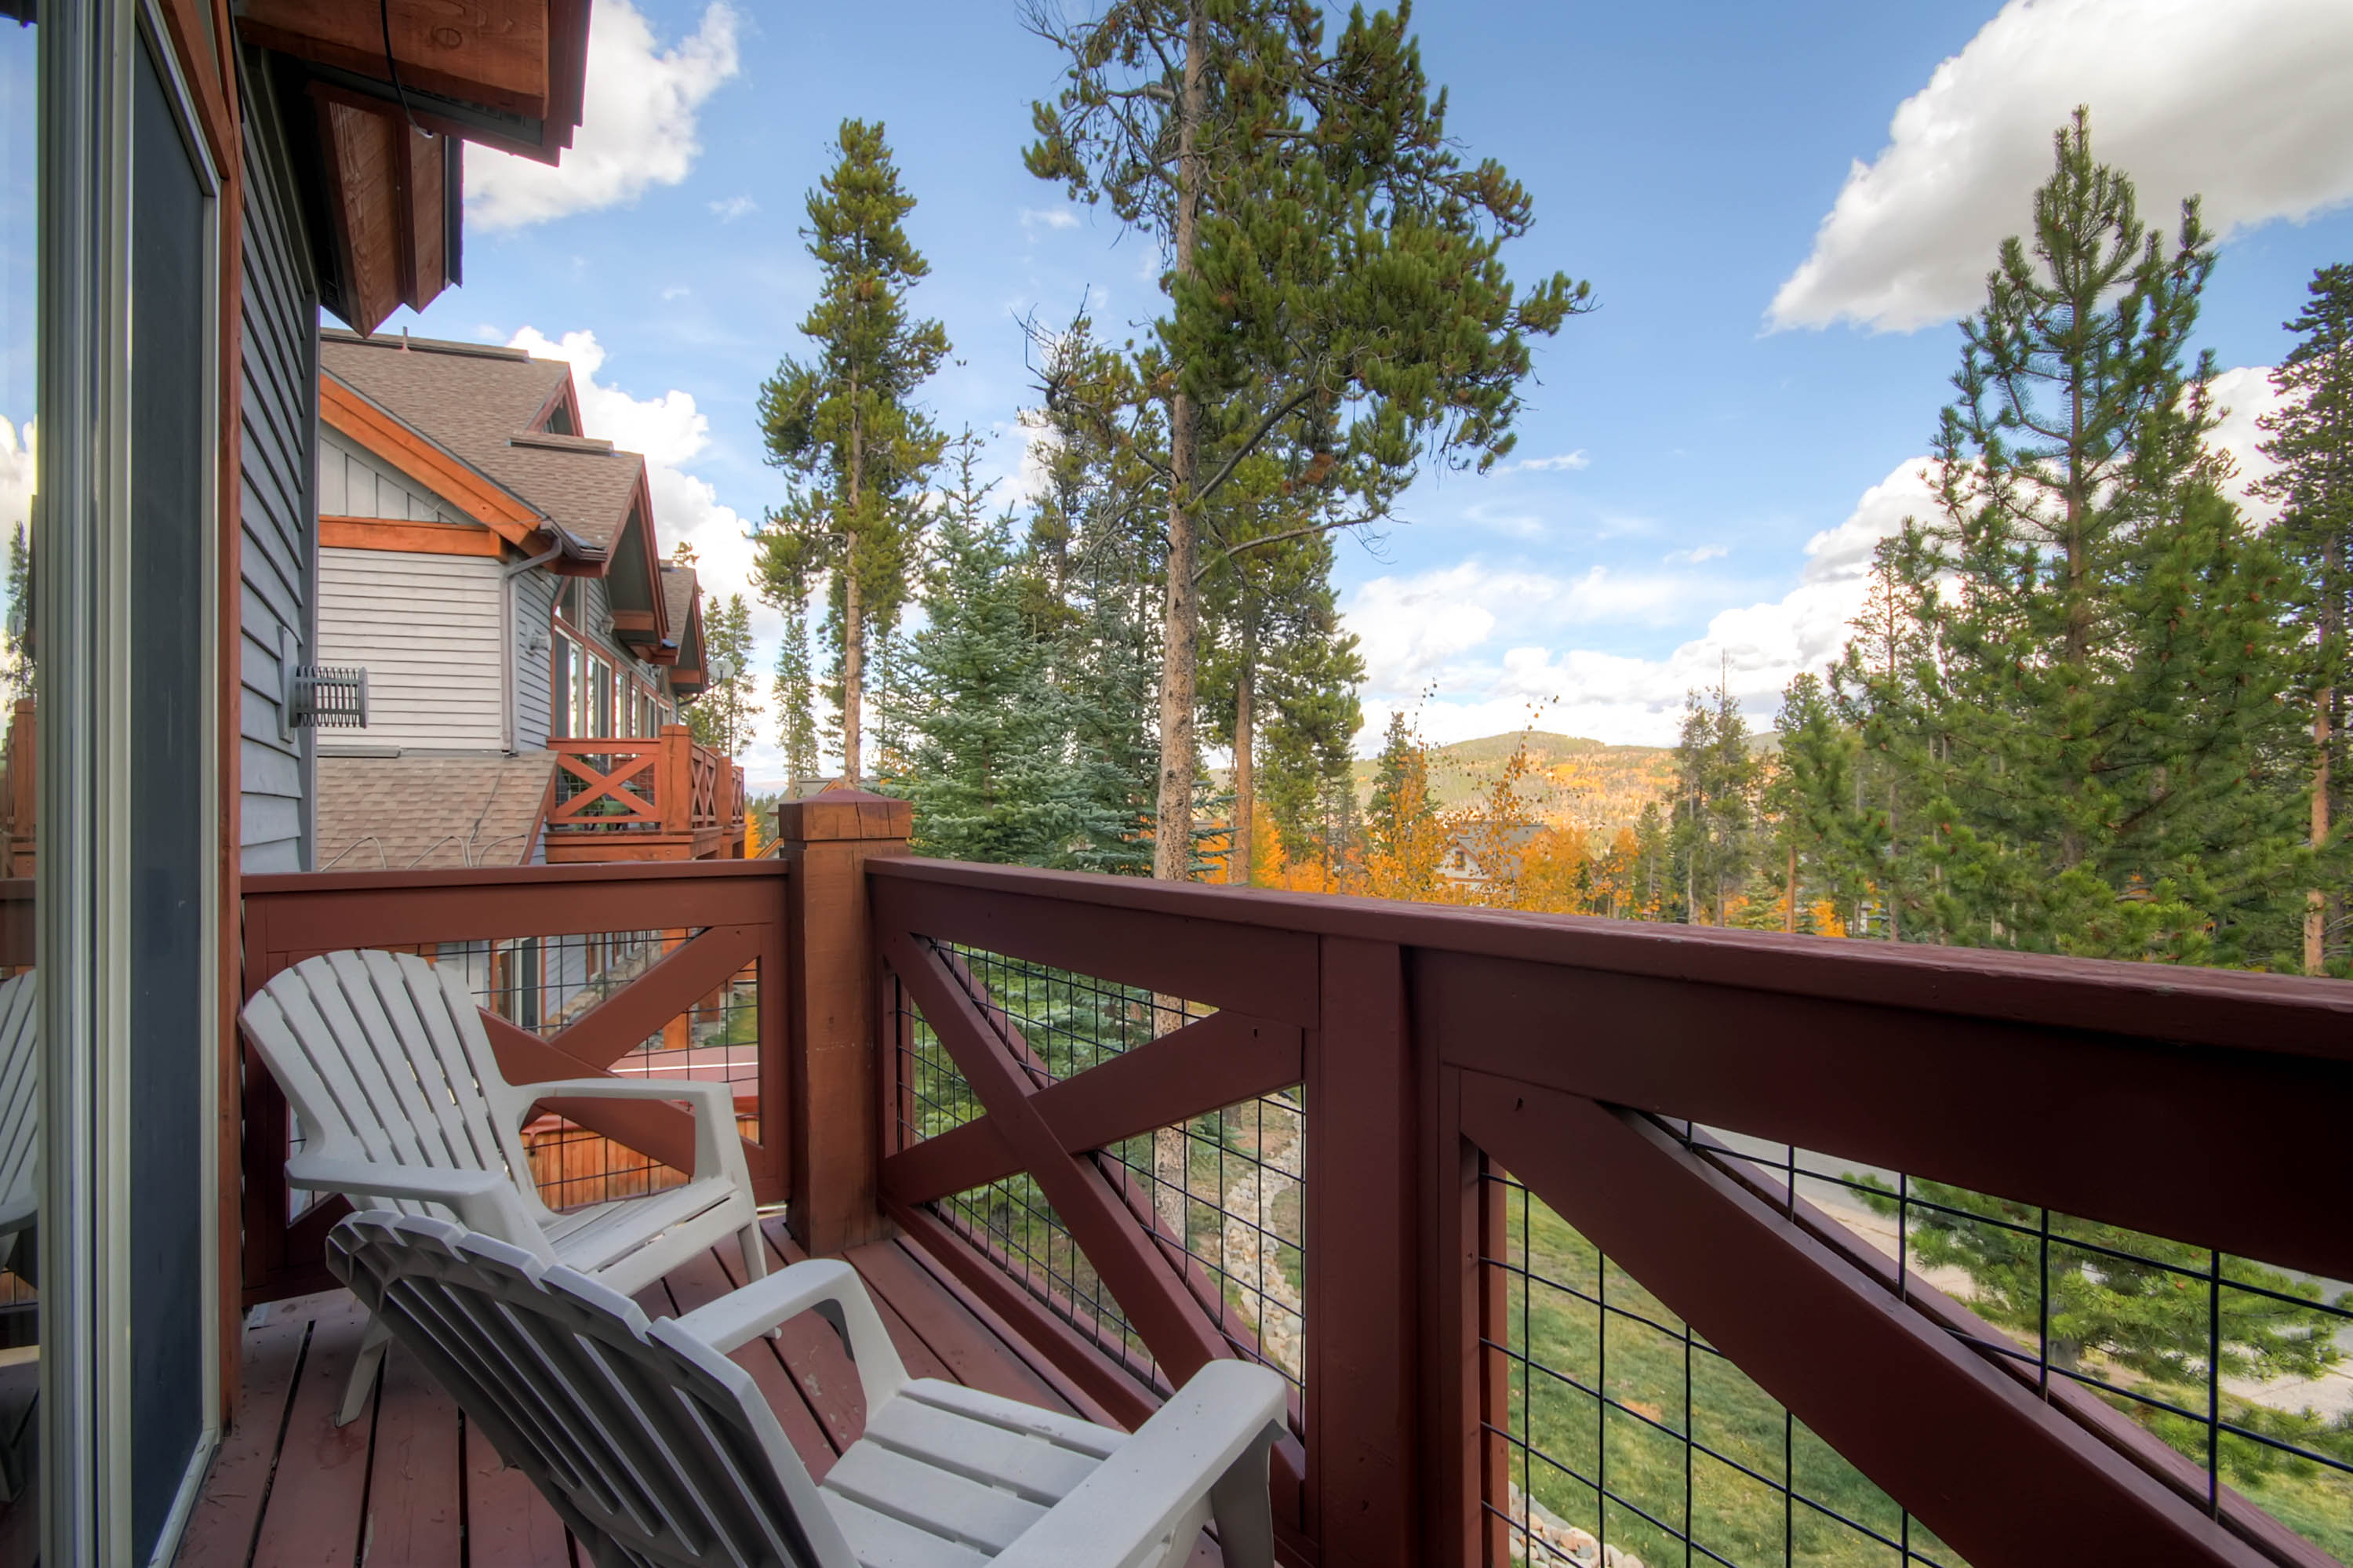 Balcony deck area off of the living area - Amber Sky Breckenridge Vacation Rental